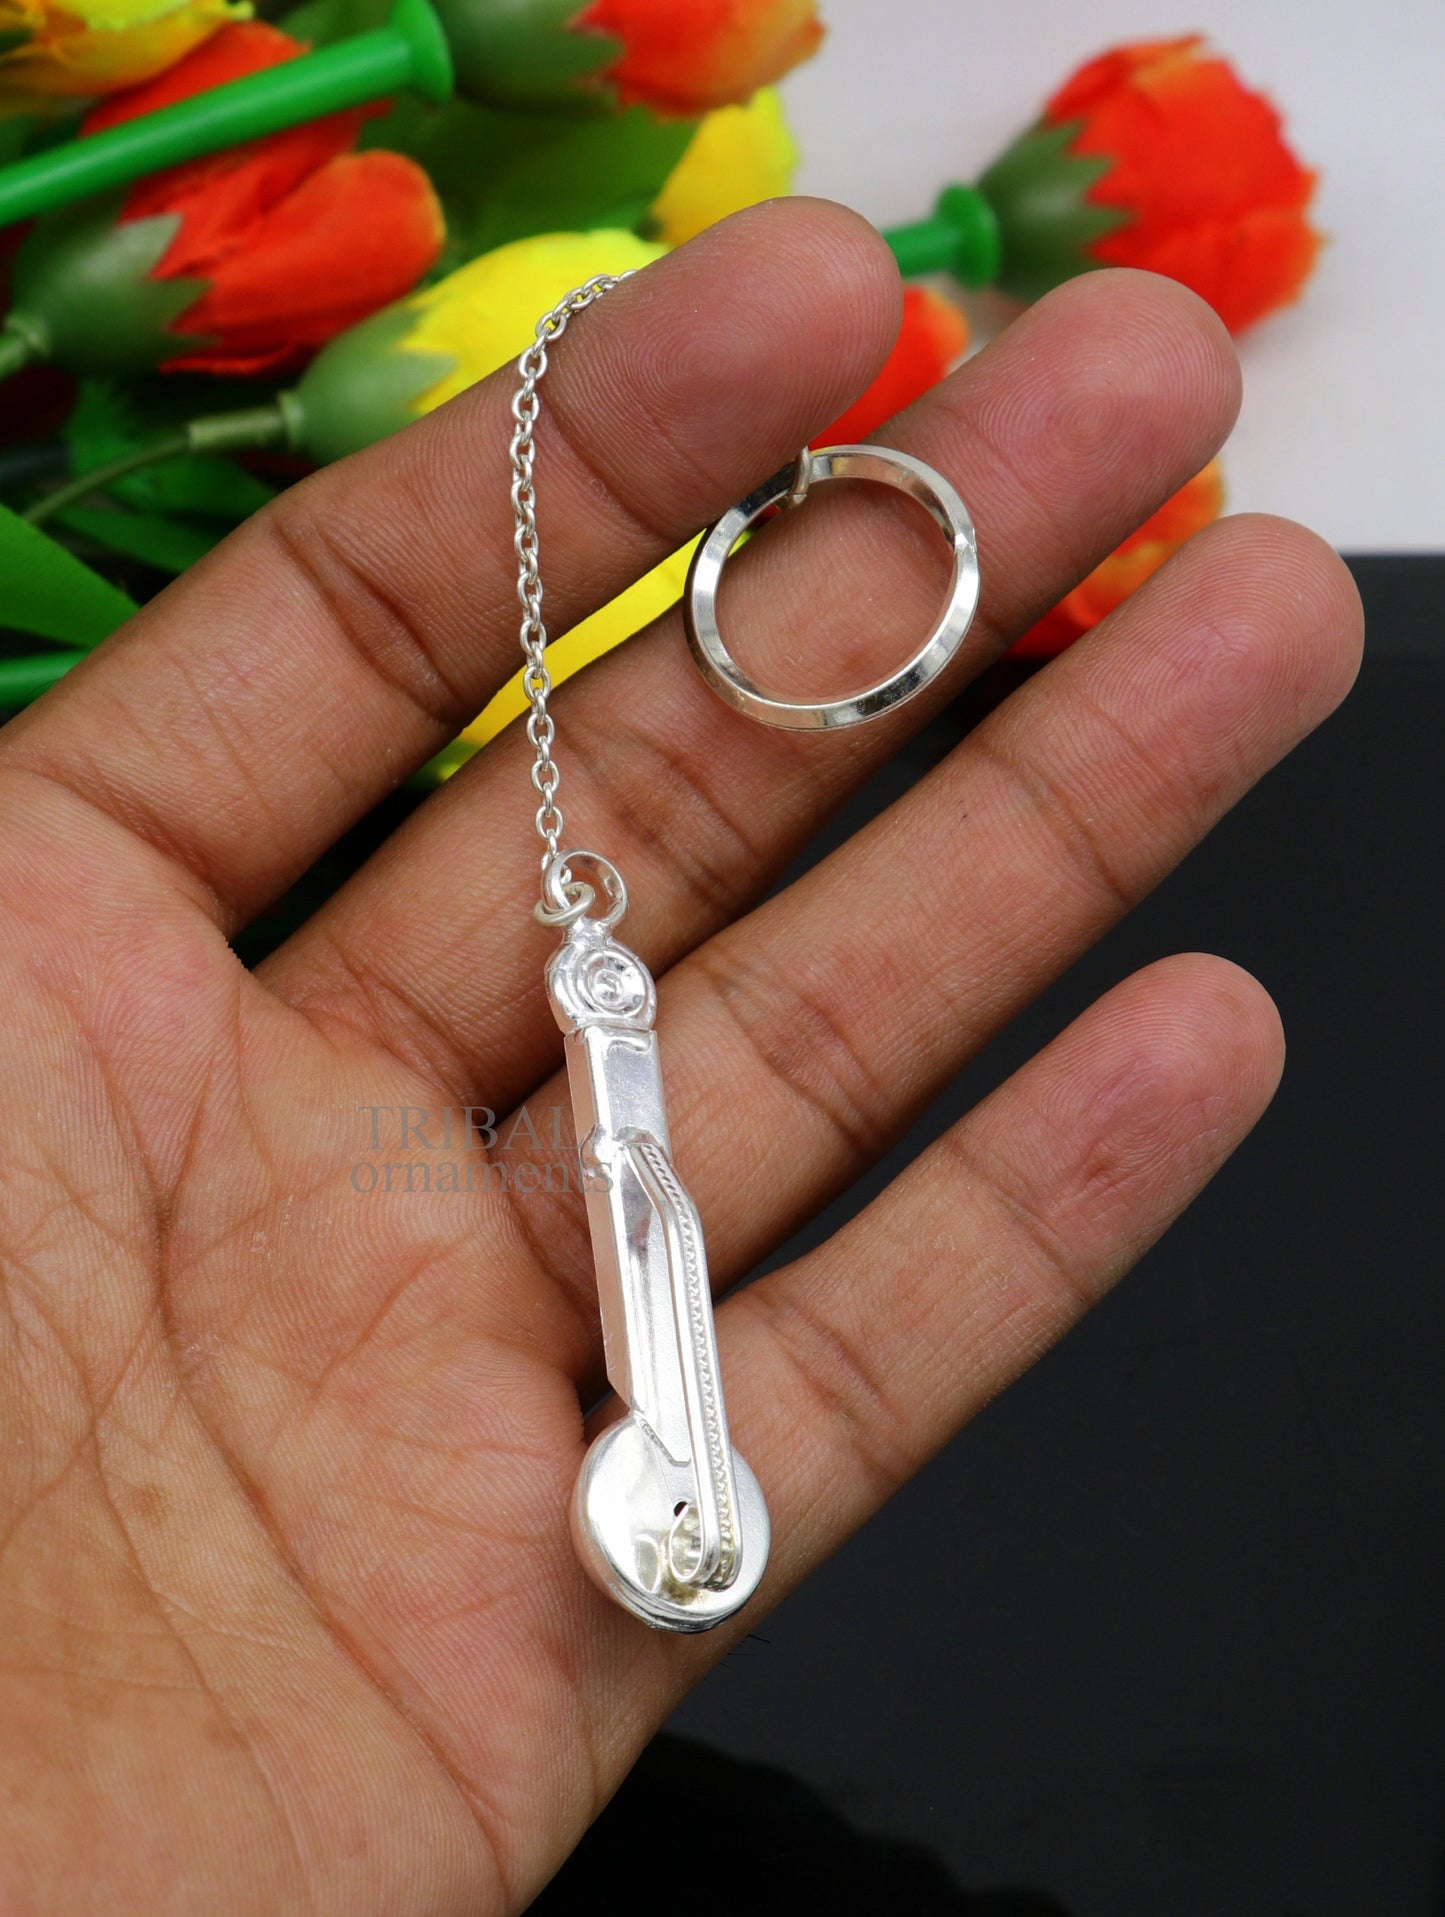 925 Sterling silver handmade vintage Veena design solid key chain, royal gifting silver accessories unisex gift kch18 - TRIBAL ORNAMENTS